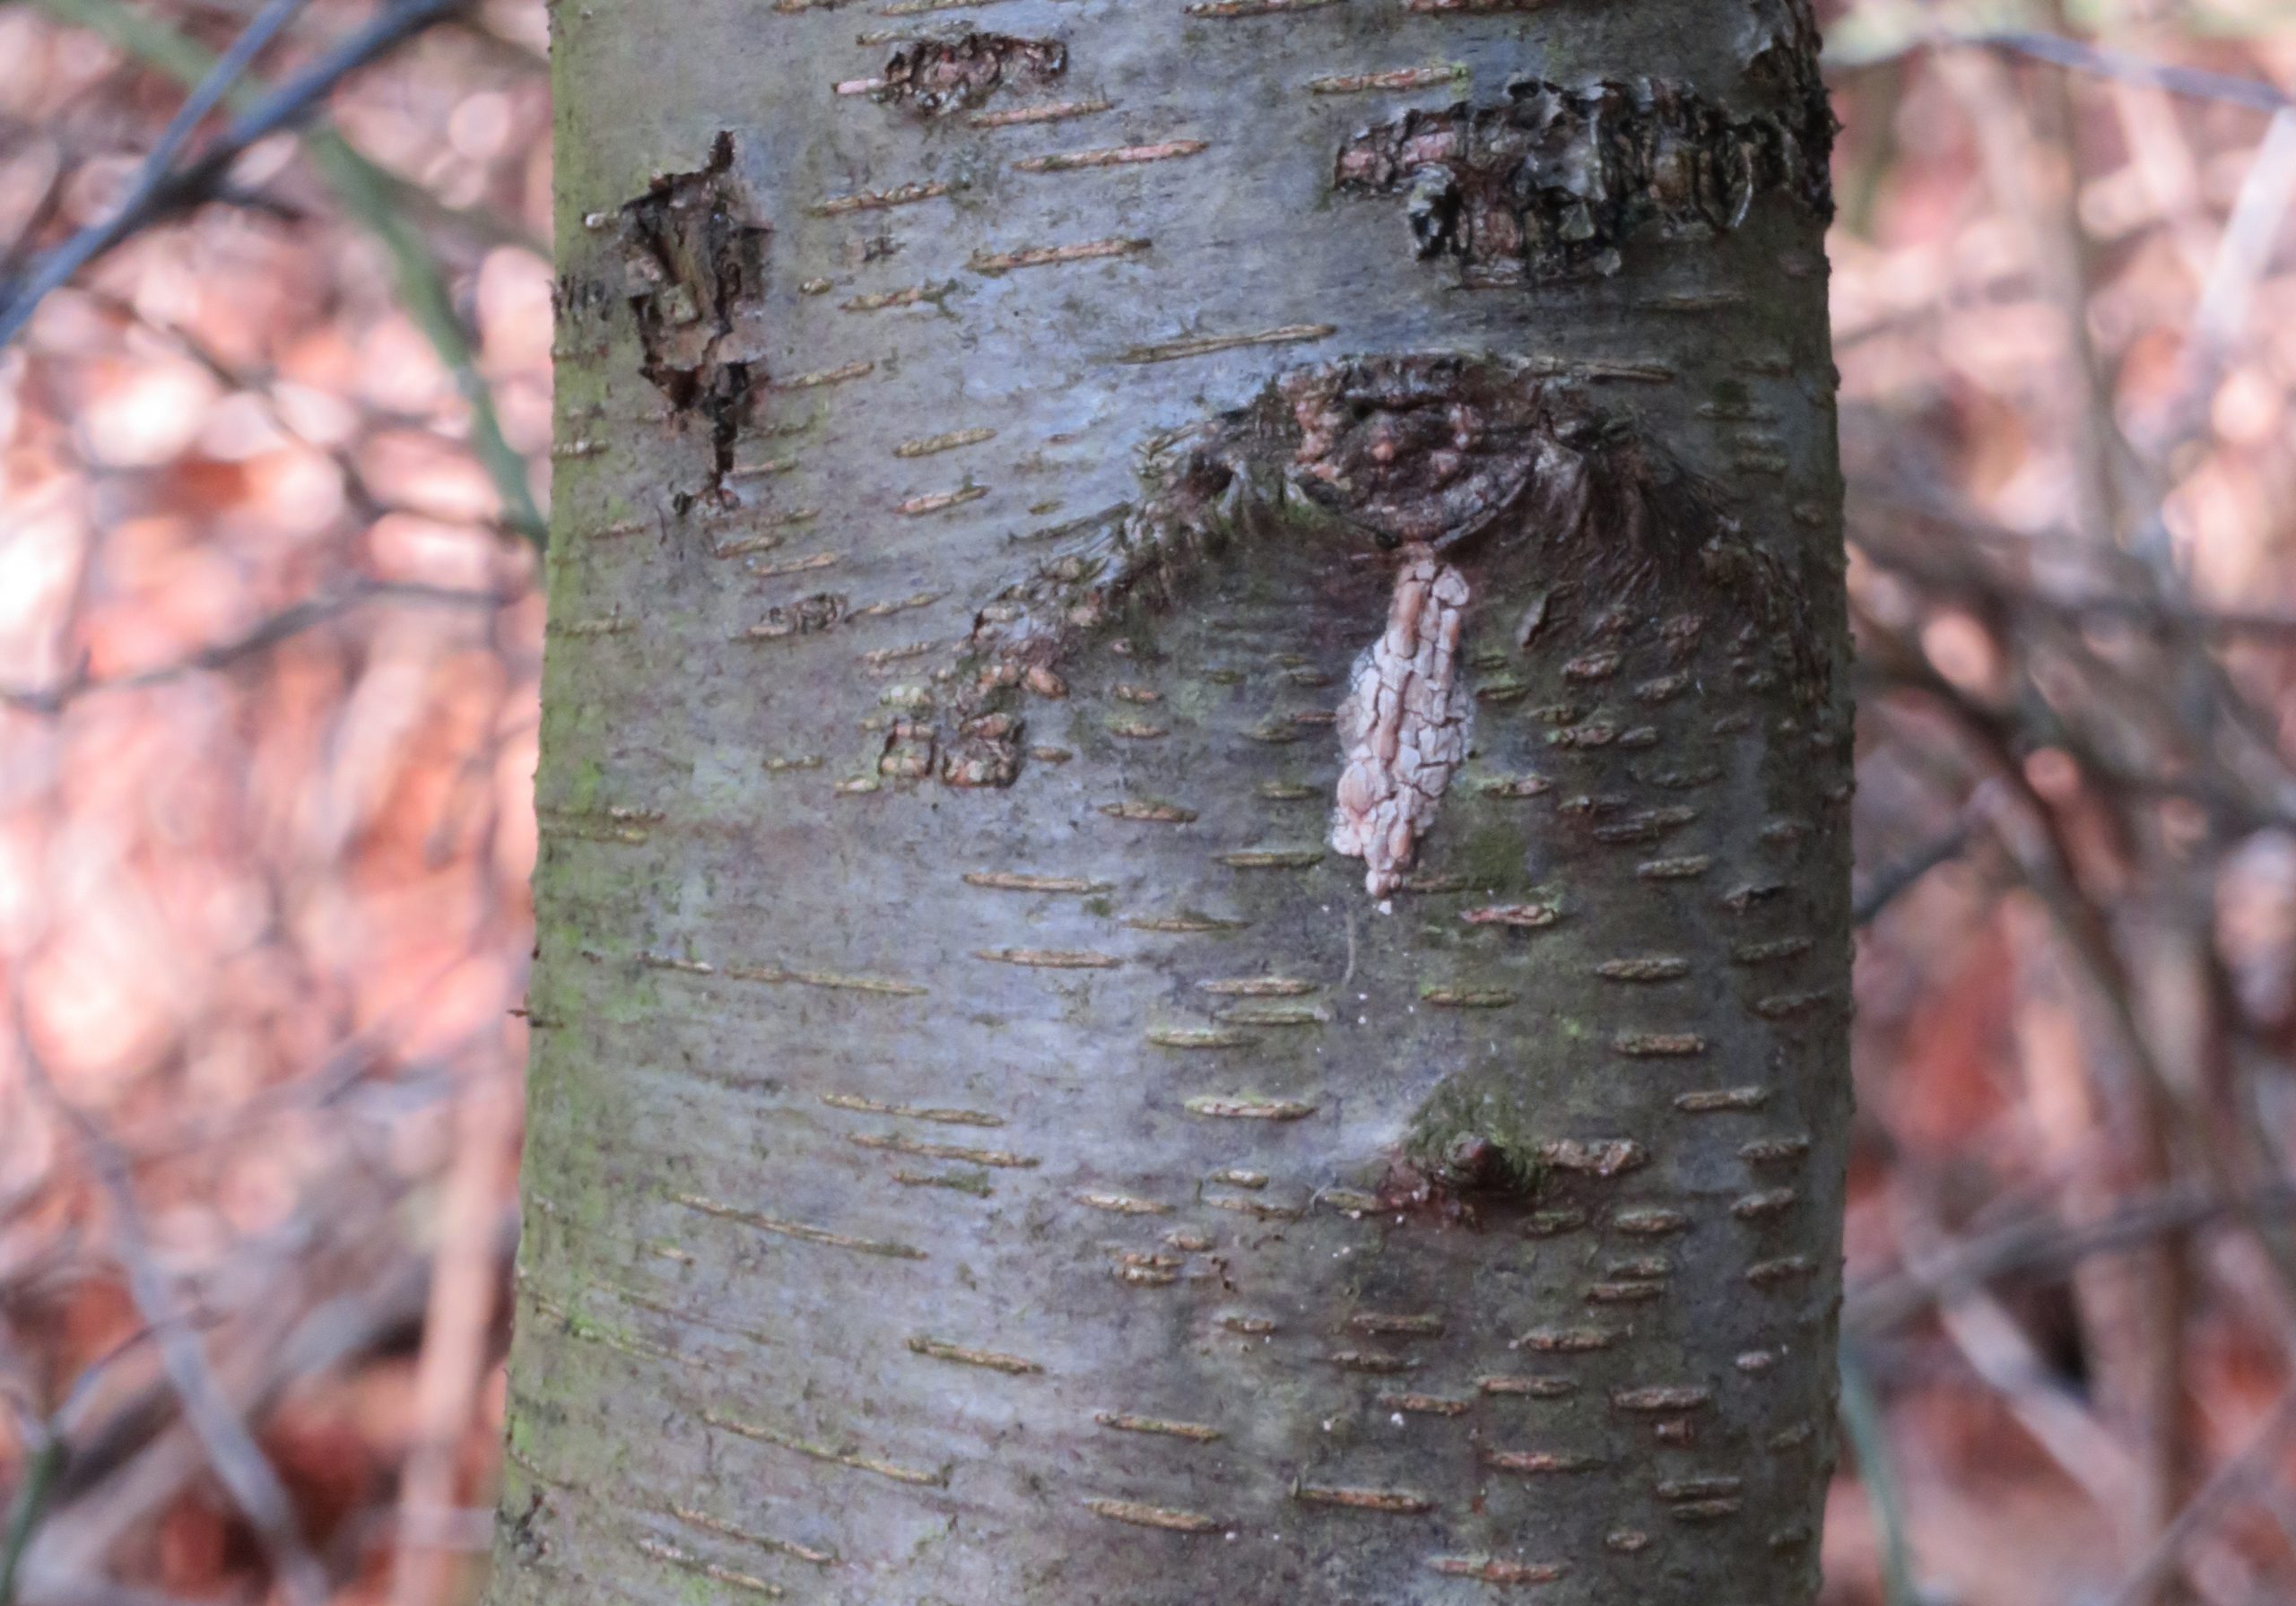 Spotted lanternfly egg mass on a black birch. Egg masses can be found during winter months on trees, vehicles and building materials.